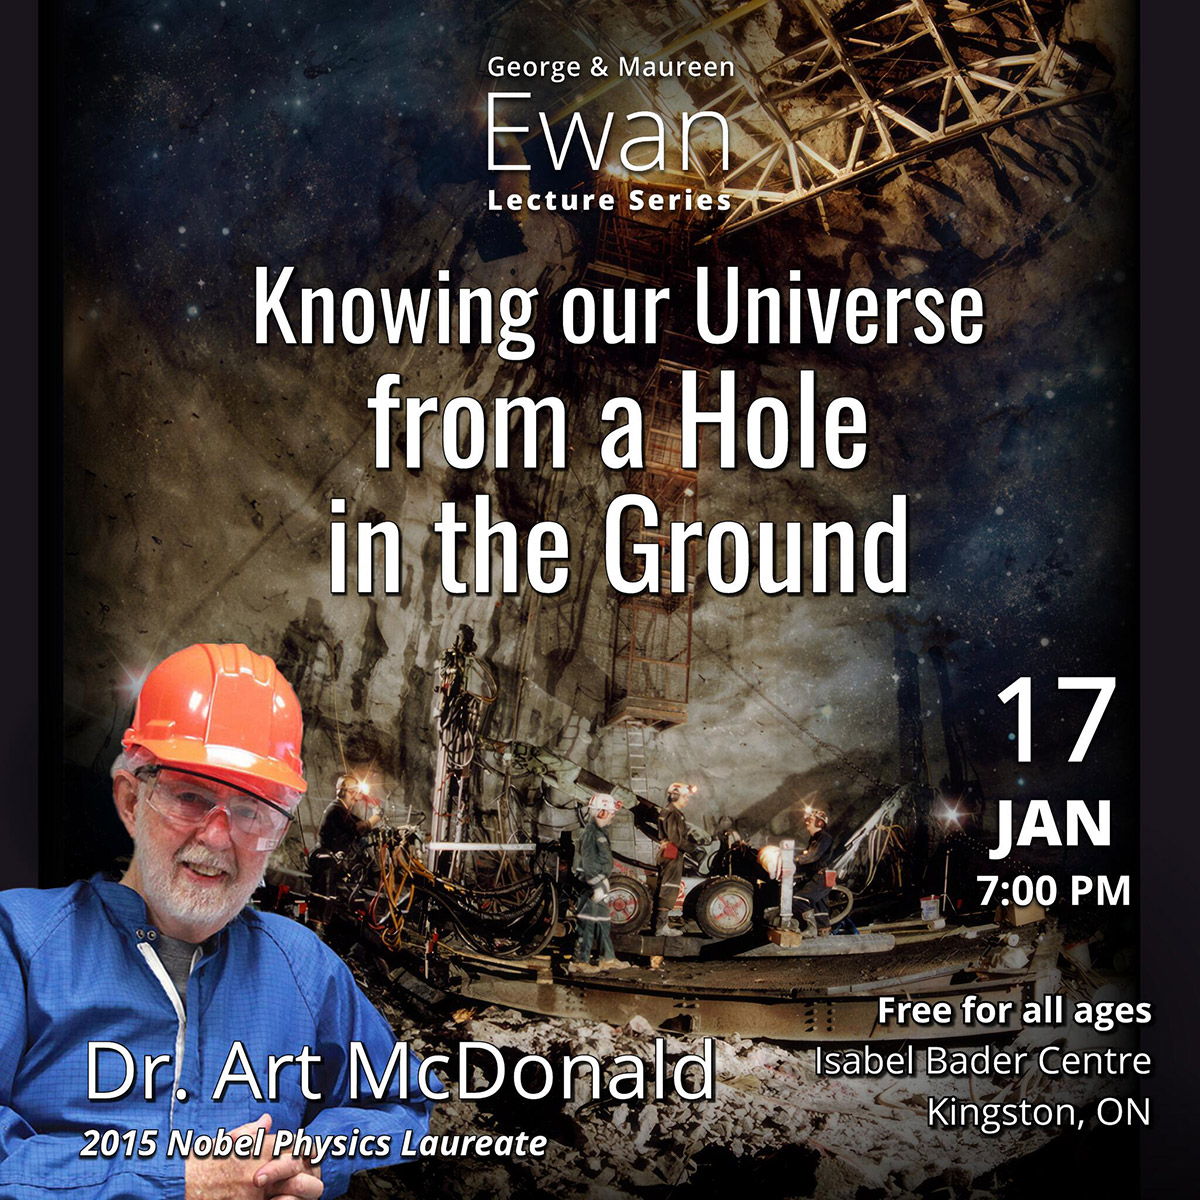 Event poster of Art McDonald in front of a picture of the excavation of the SNO cavity 2km underground. Highlights the event date of Jan 17th, at the Isabel Bader Centre.